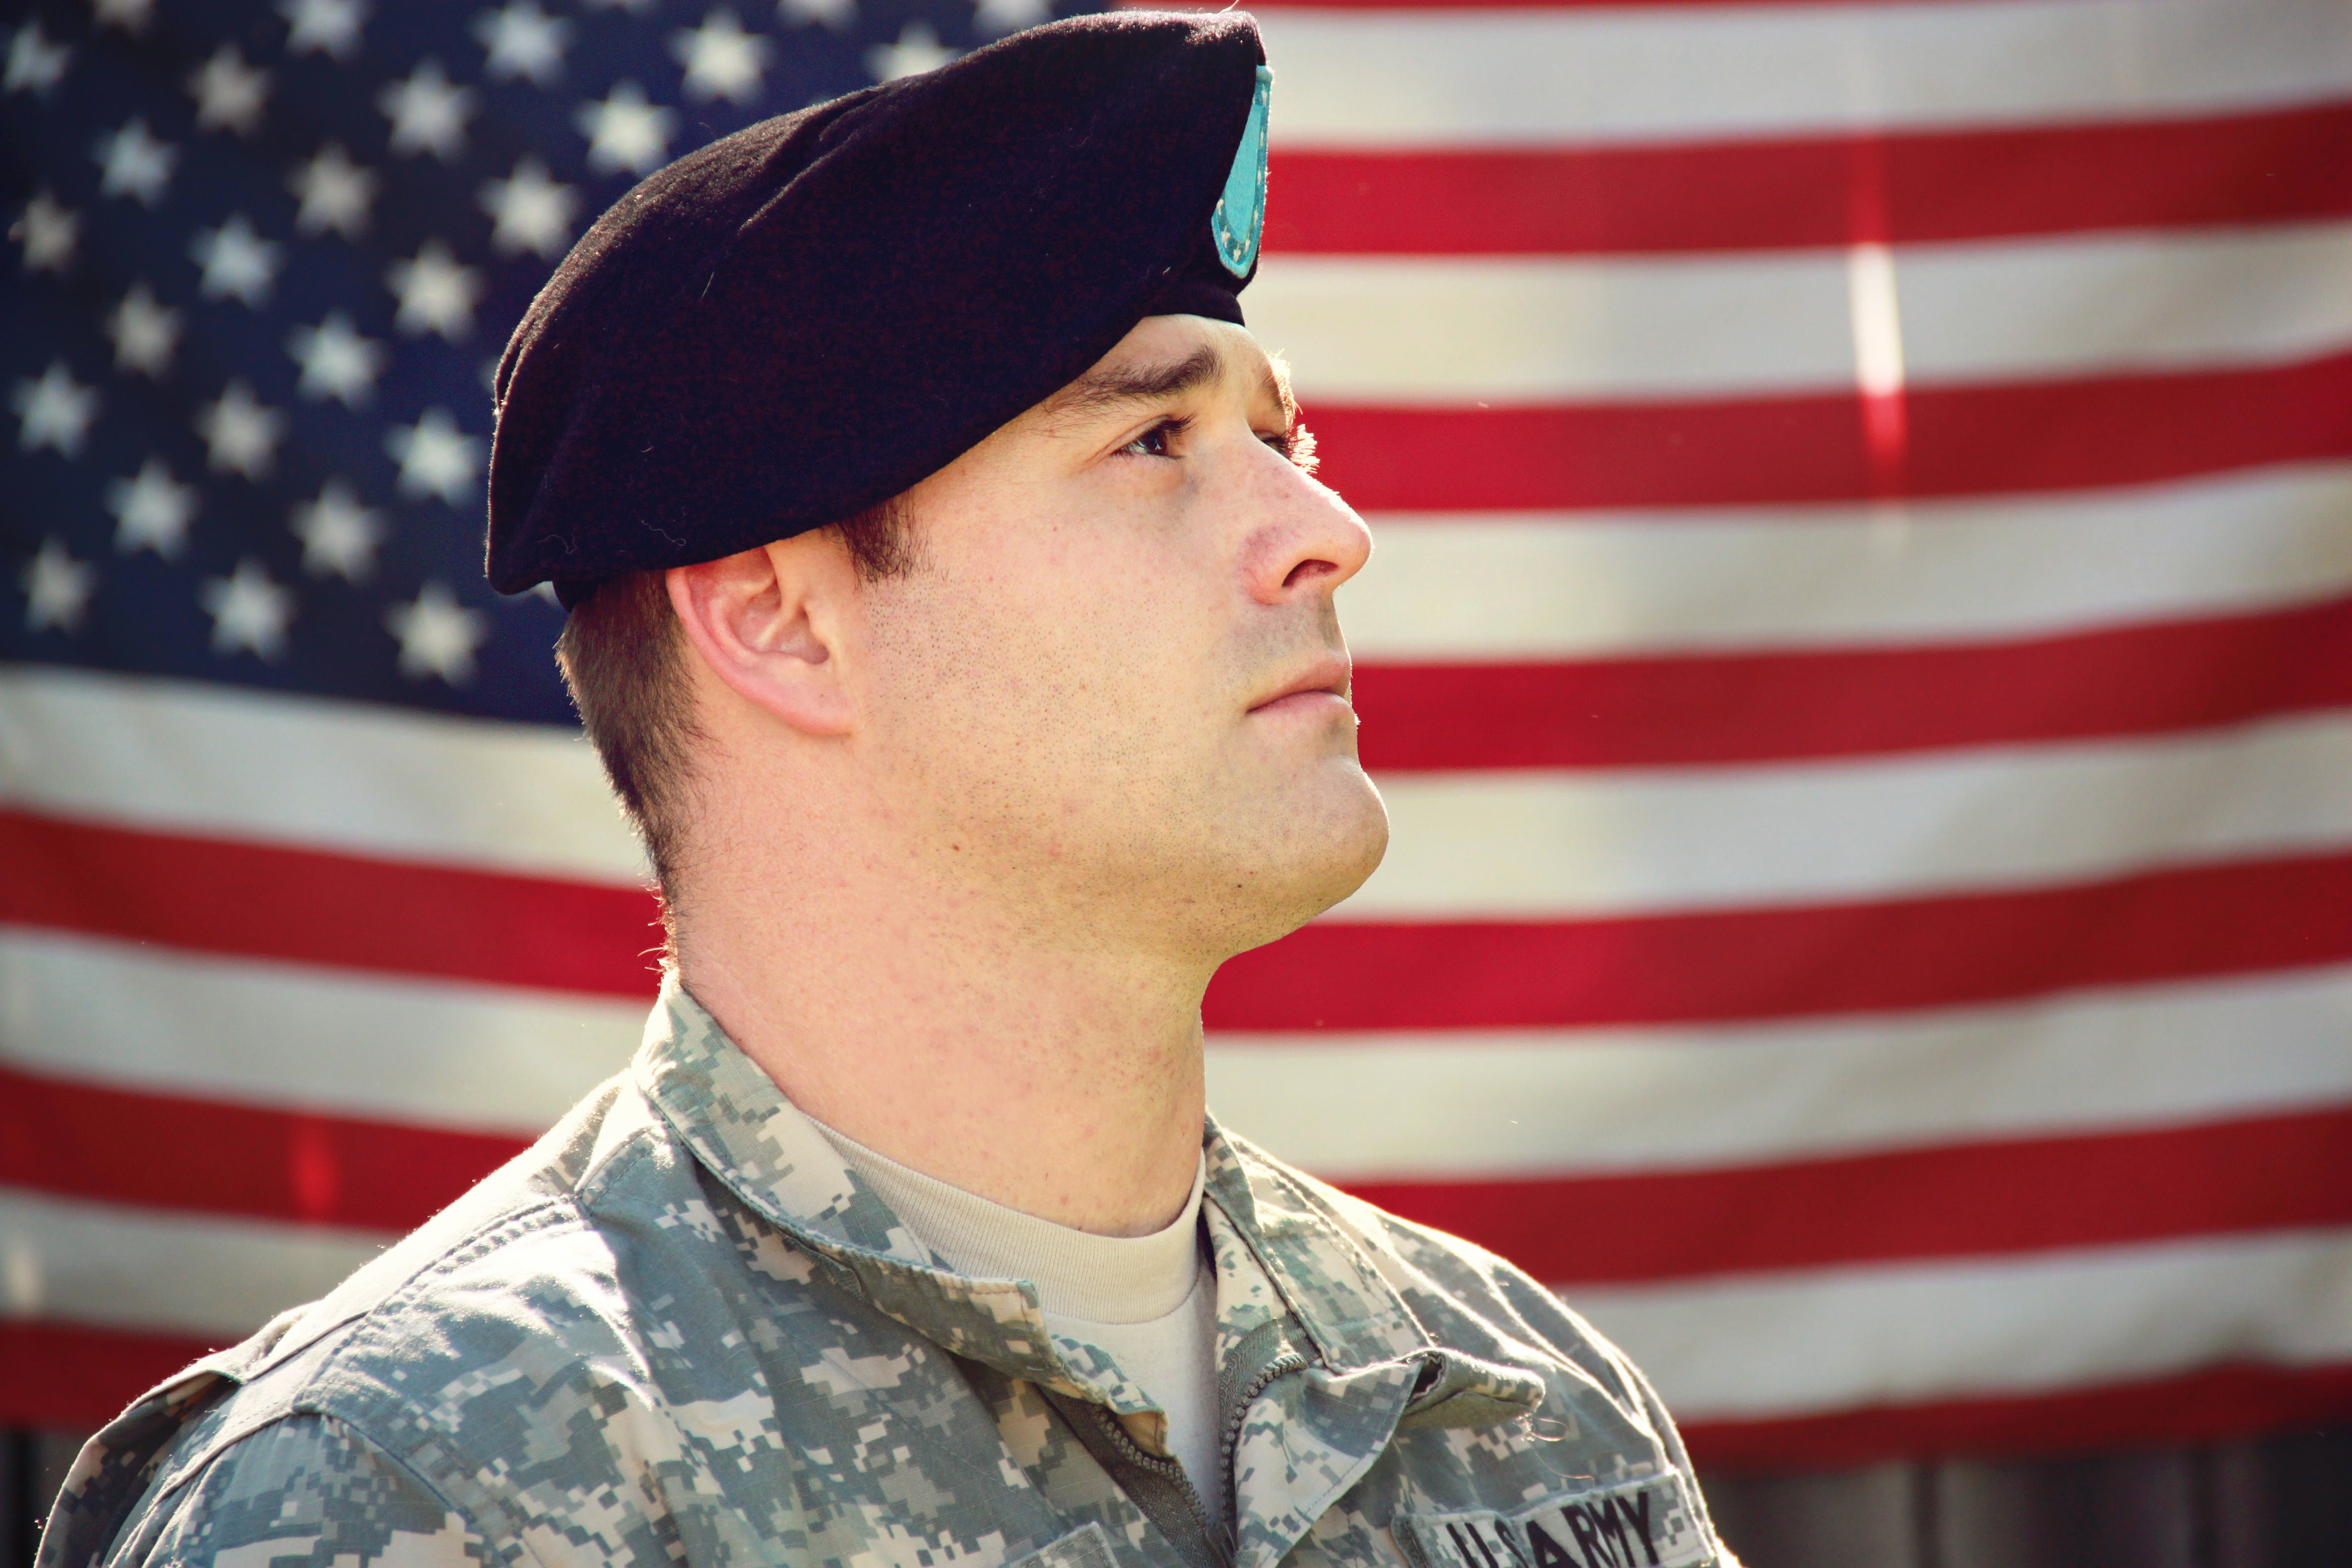 A soldier dressed in uniform with the American flag behind him | Source: Pexels